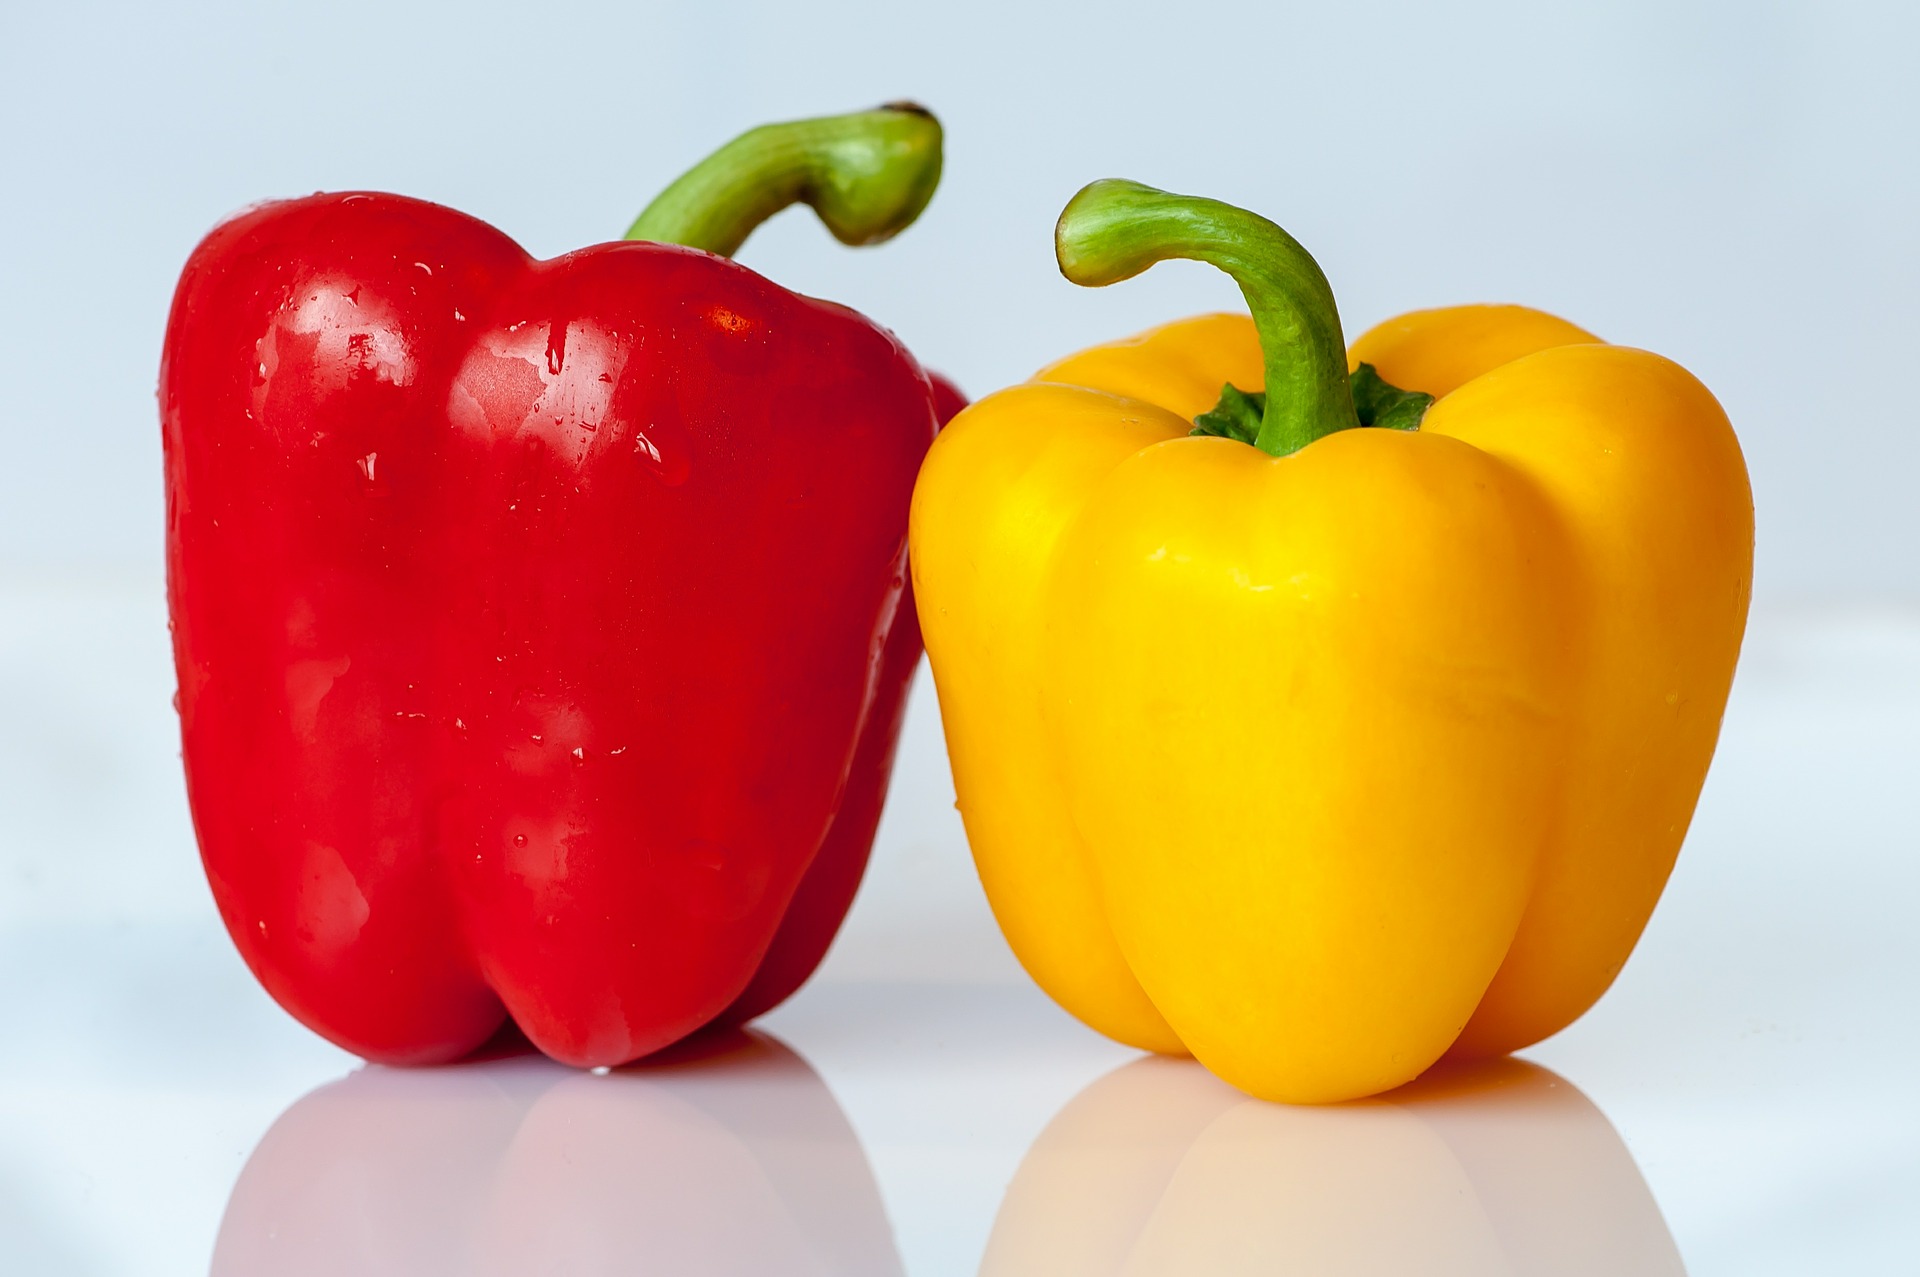 bell-peppers-421087_1920